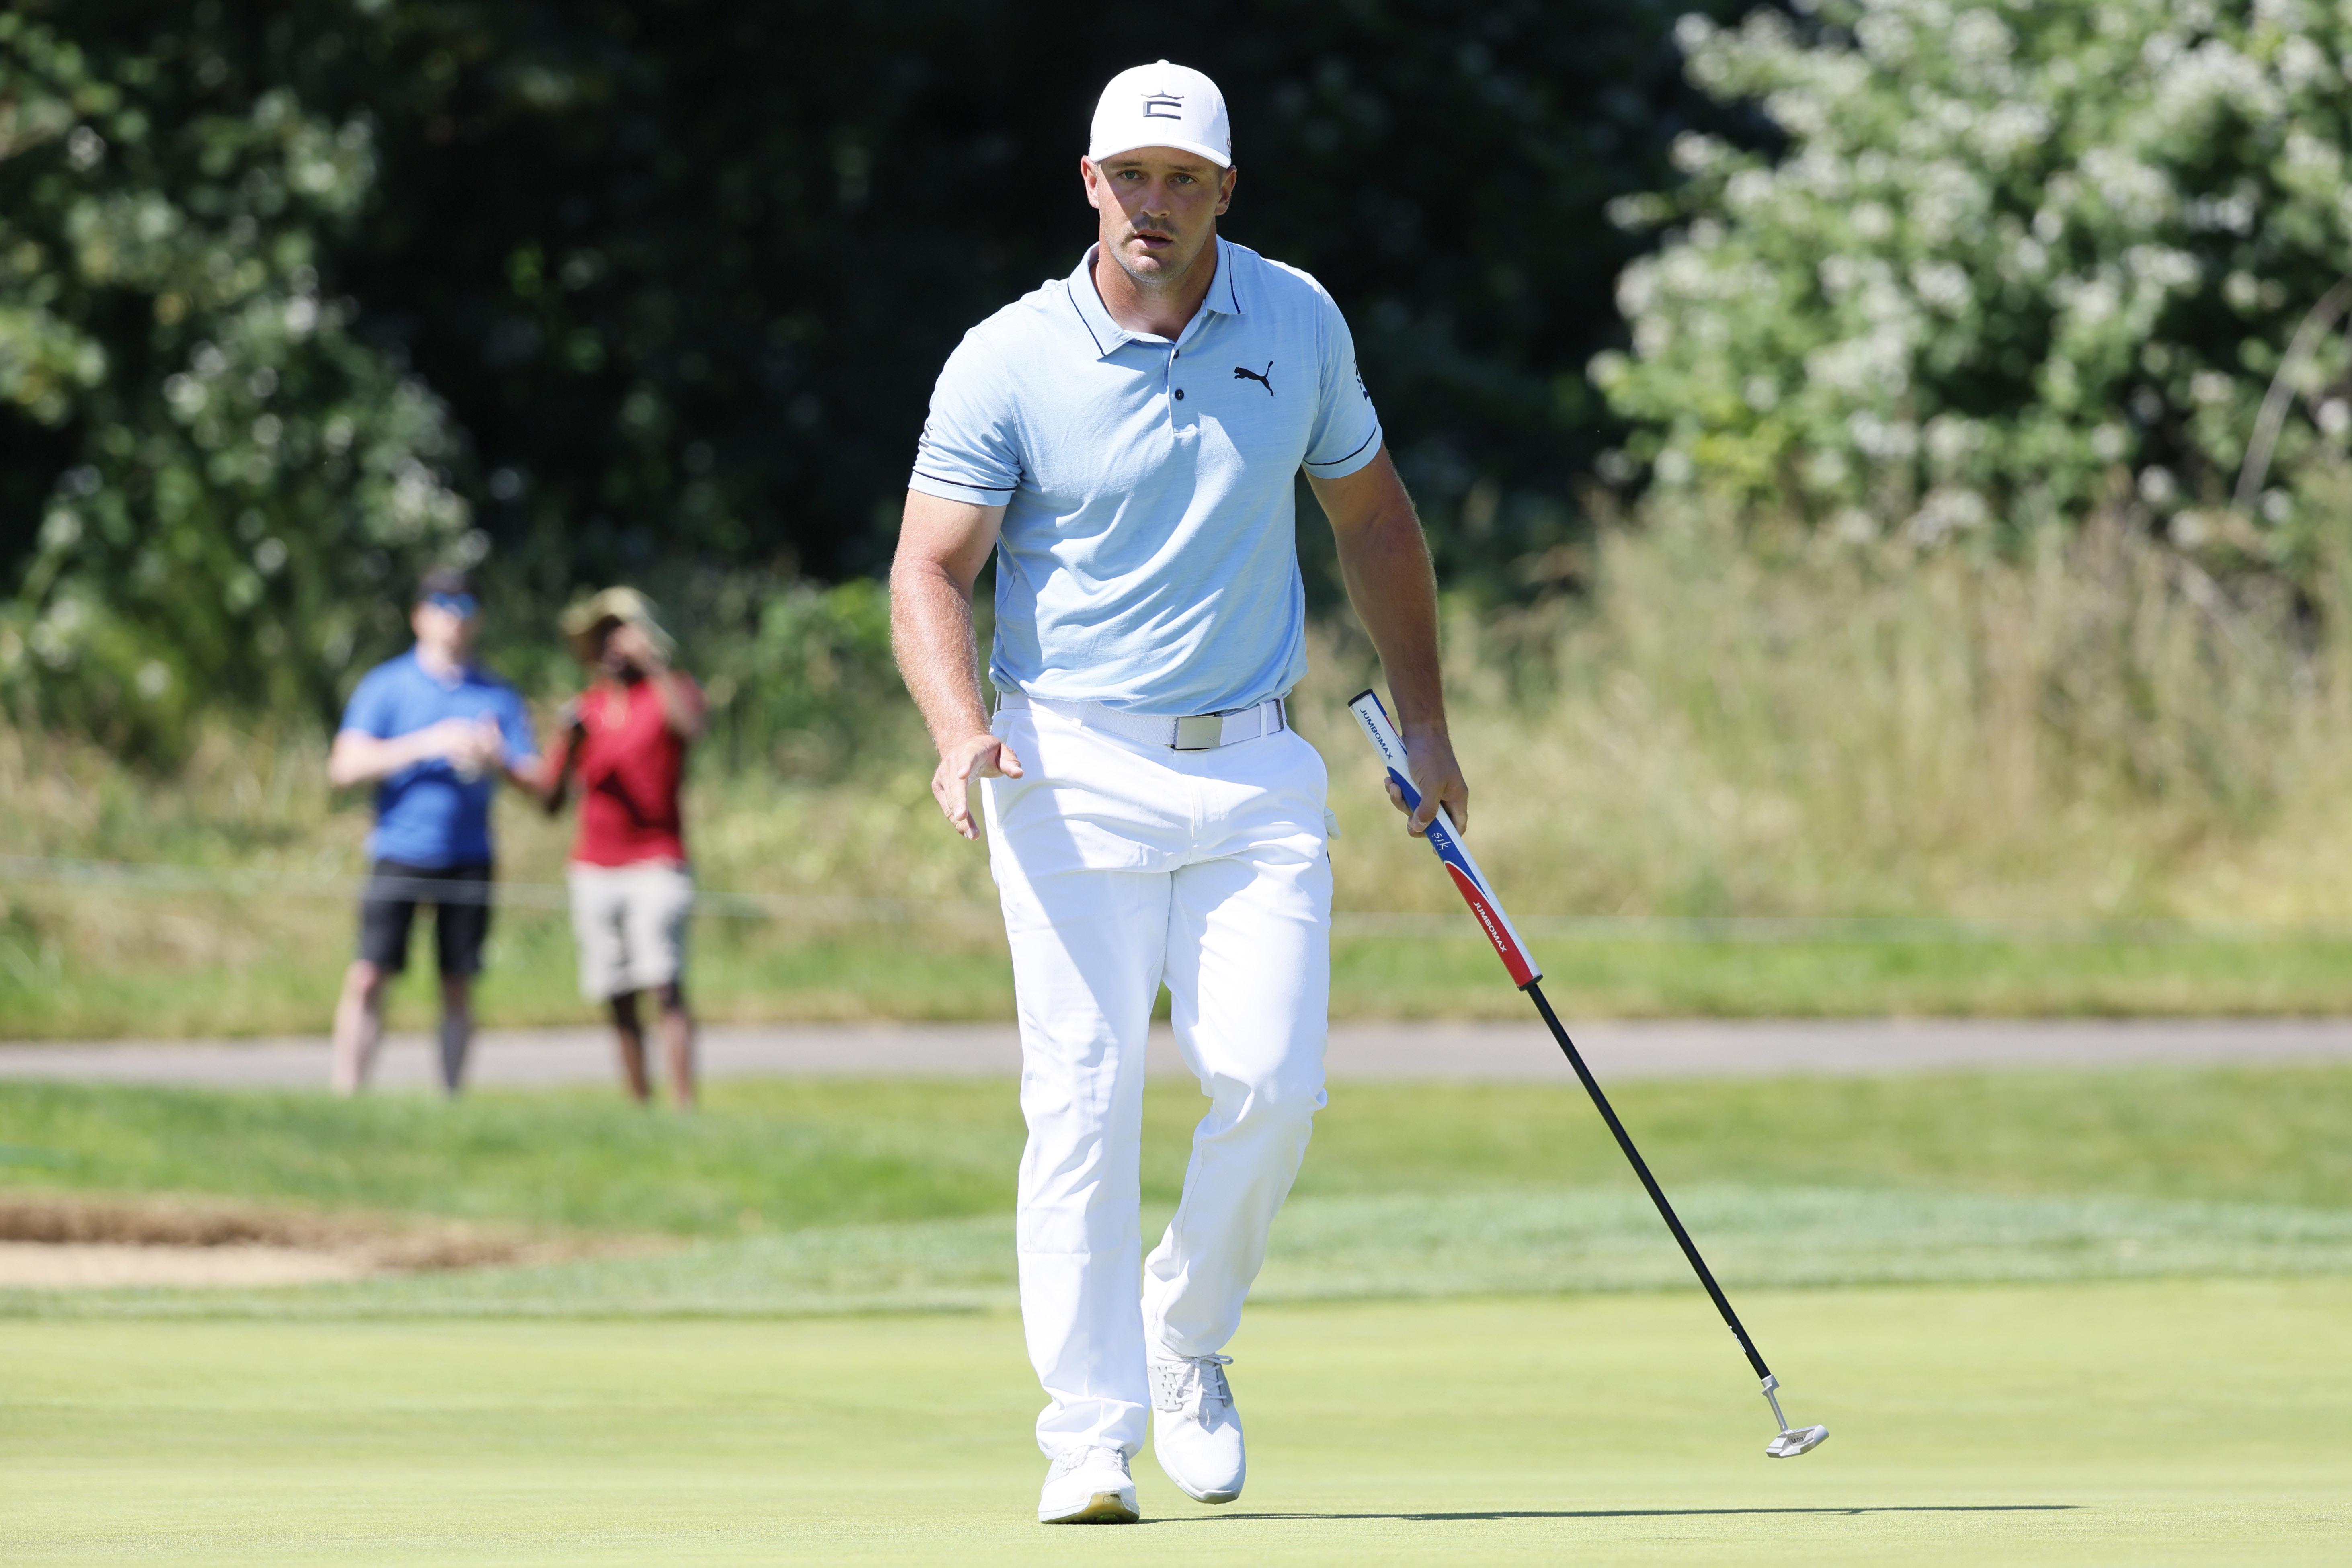 Bryson Dechambeau Open Championship 2022 Odds, History, Predictions & How to Watch